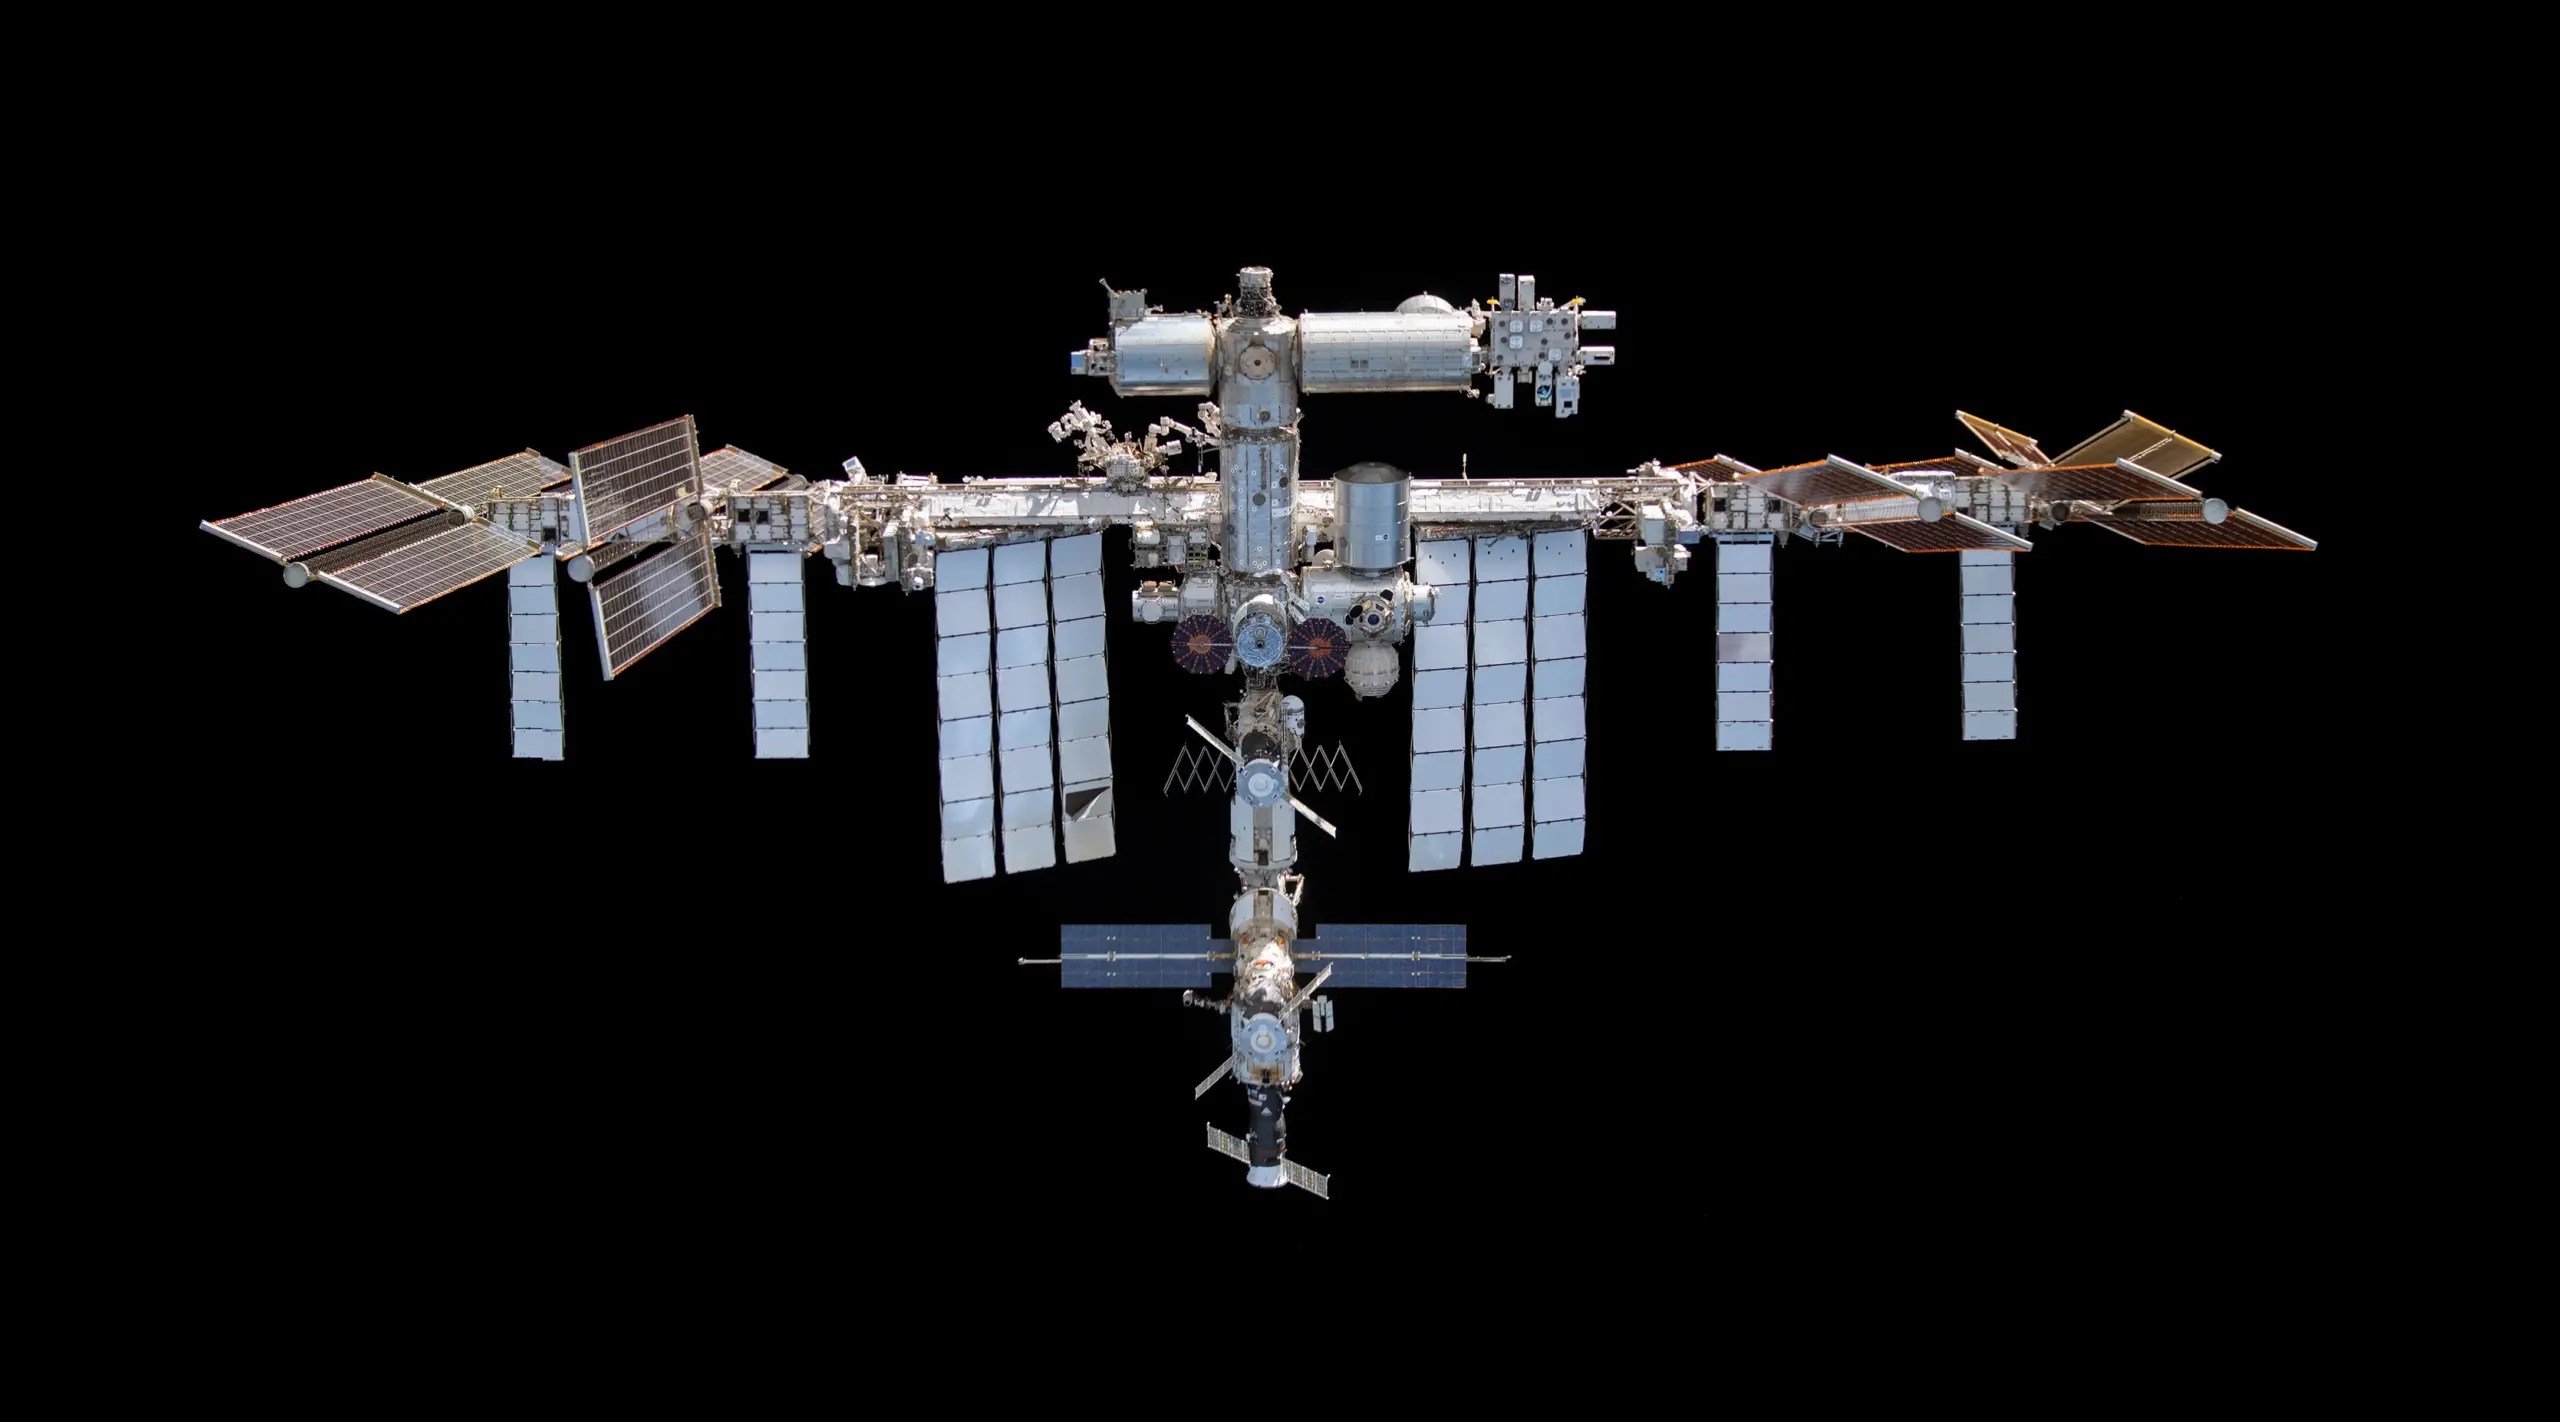 The International Space Station, photographed in 2021. Credit: NASA